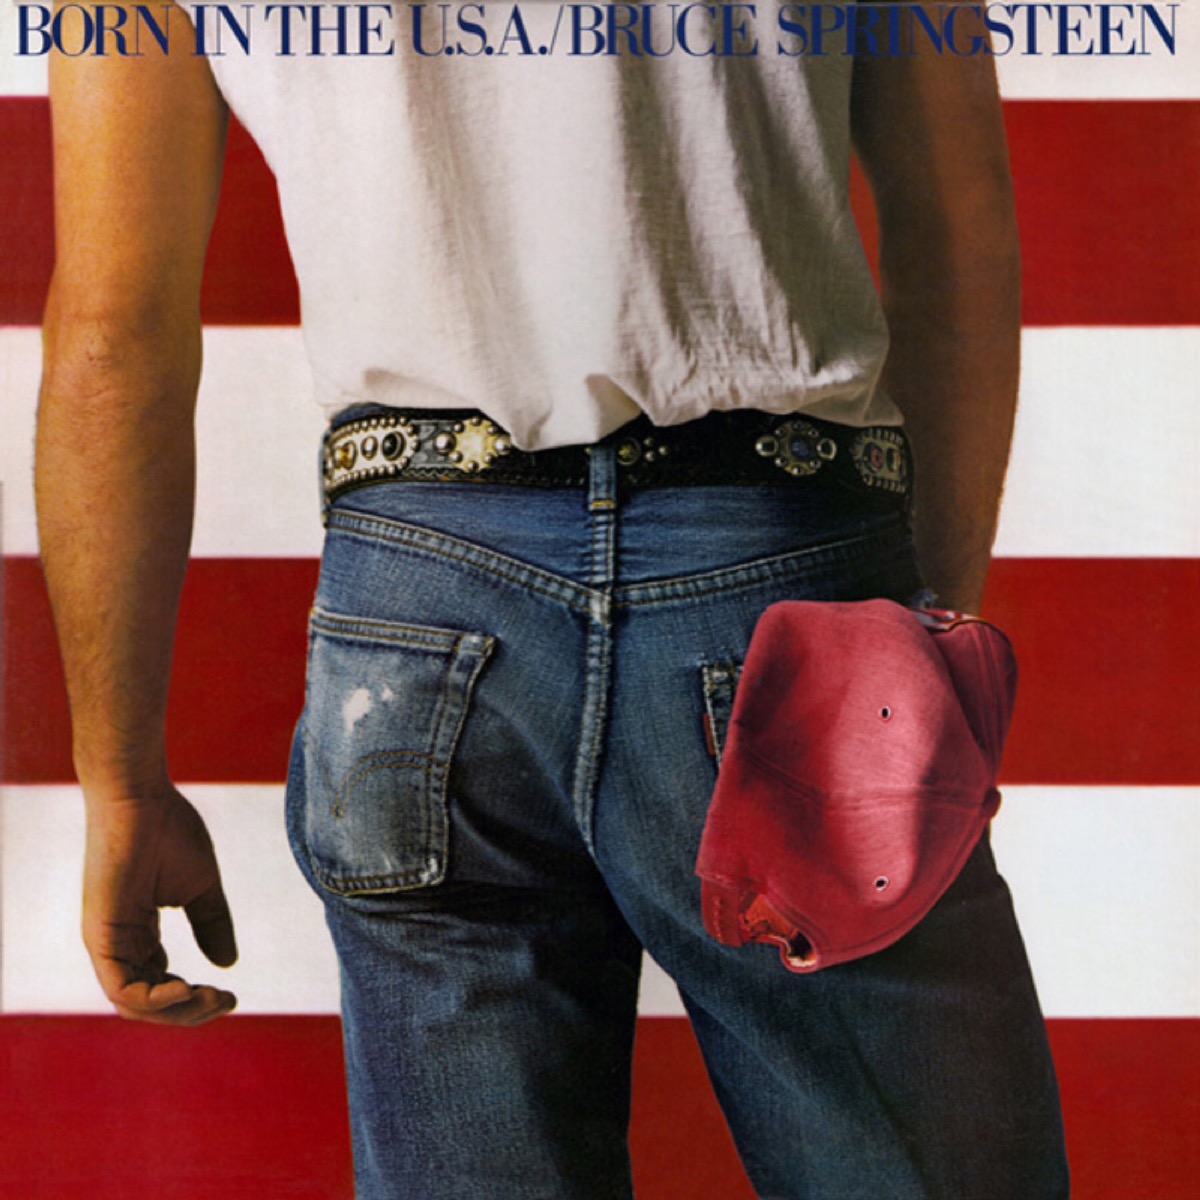 "Born in the U.S.A." by Bruce Springsteen album cover